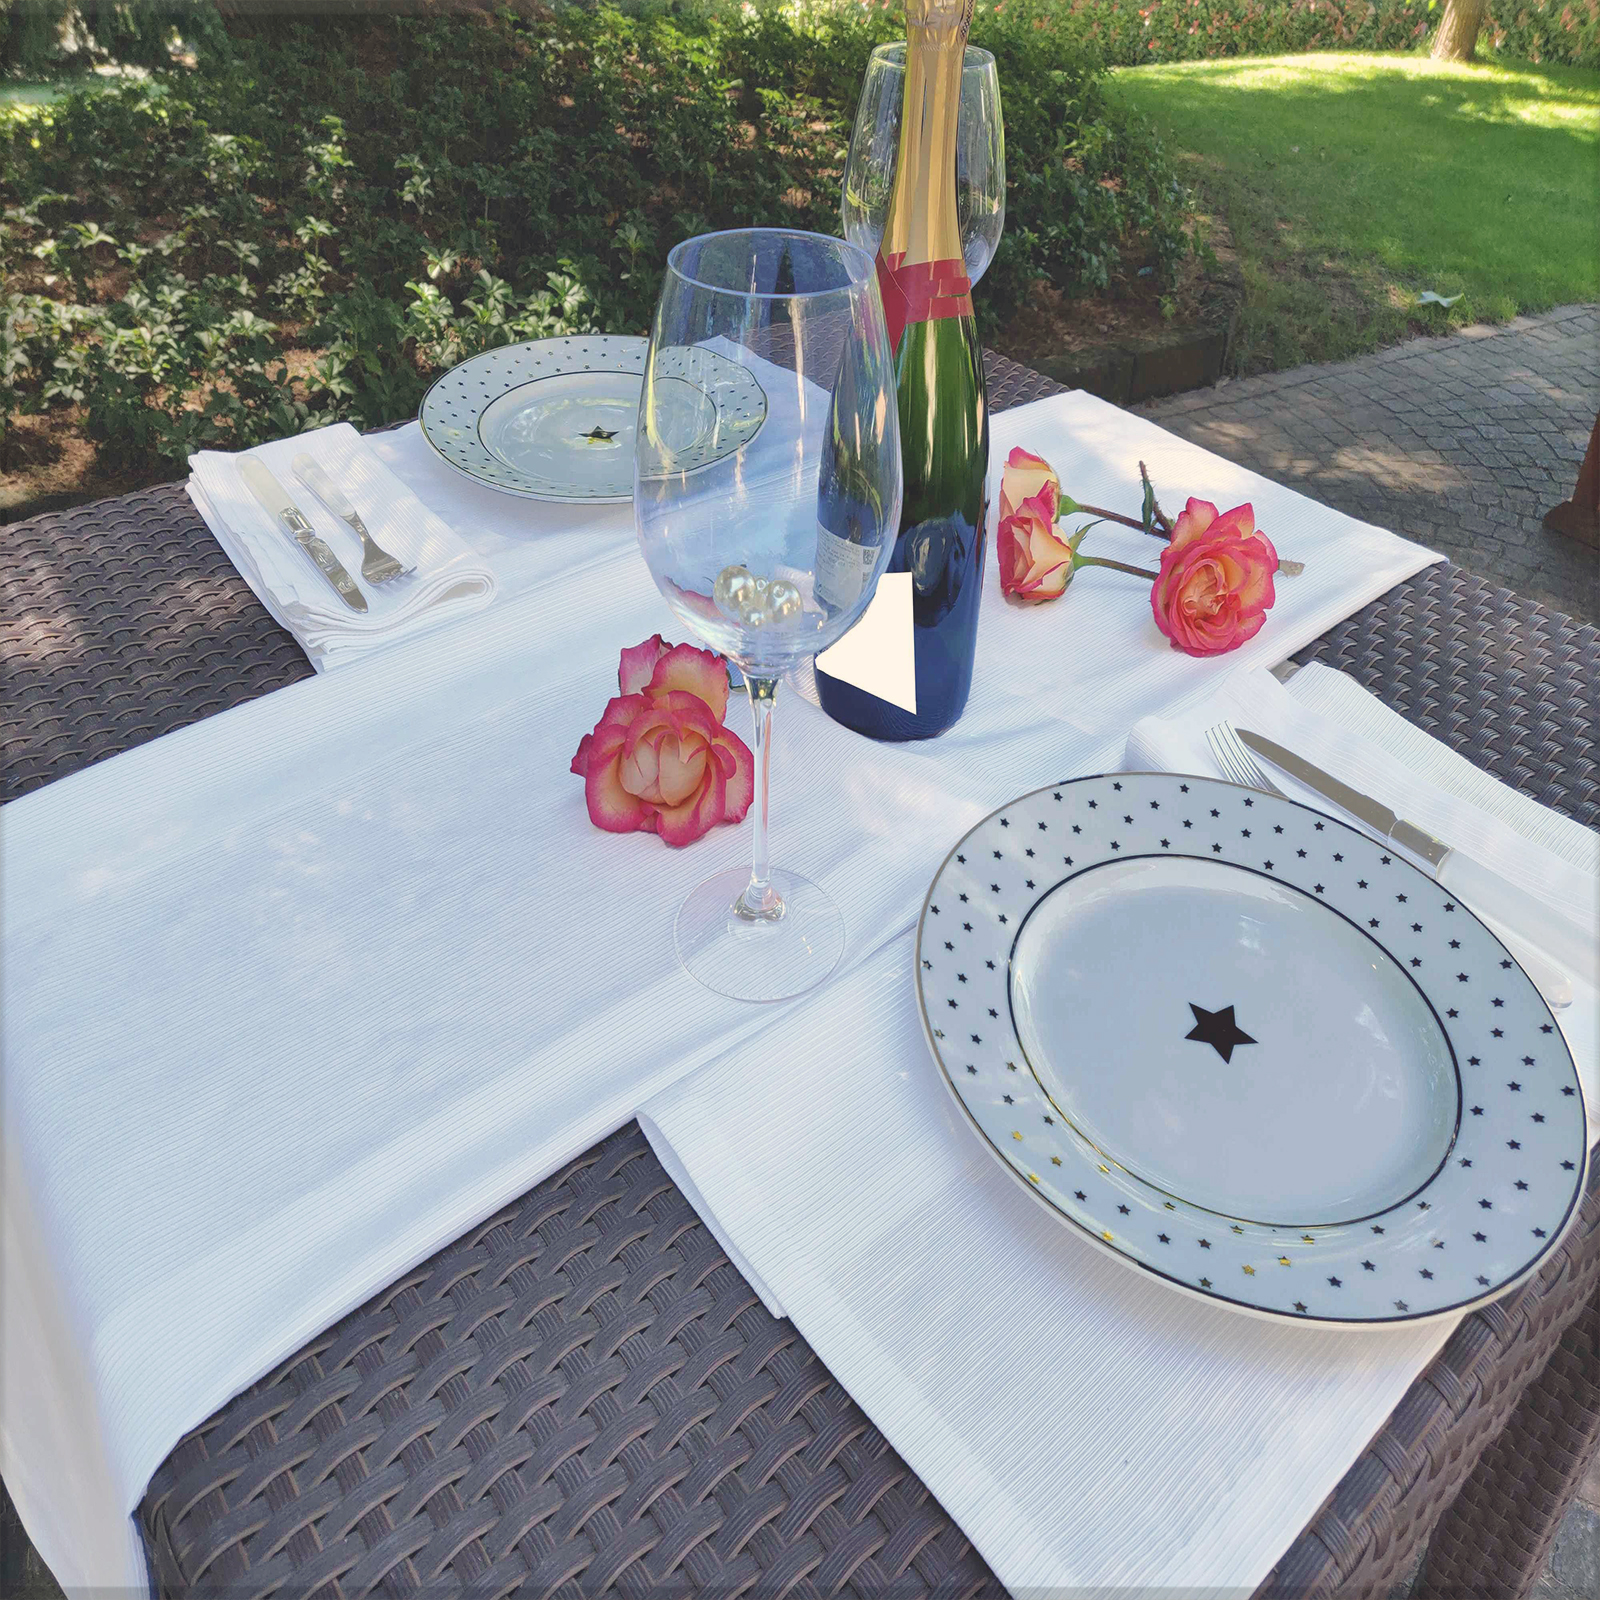 Tablecloth fabric, with anti-stain treatment Made in Italy<br /> 100% Made in Italy fabric. Style modern with fancy, flowers and Tone on tone decorations.

 Treatments: indanthrene and stain-resistant. Type of workings: jacquard. 